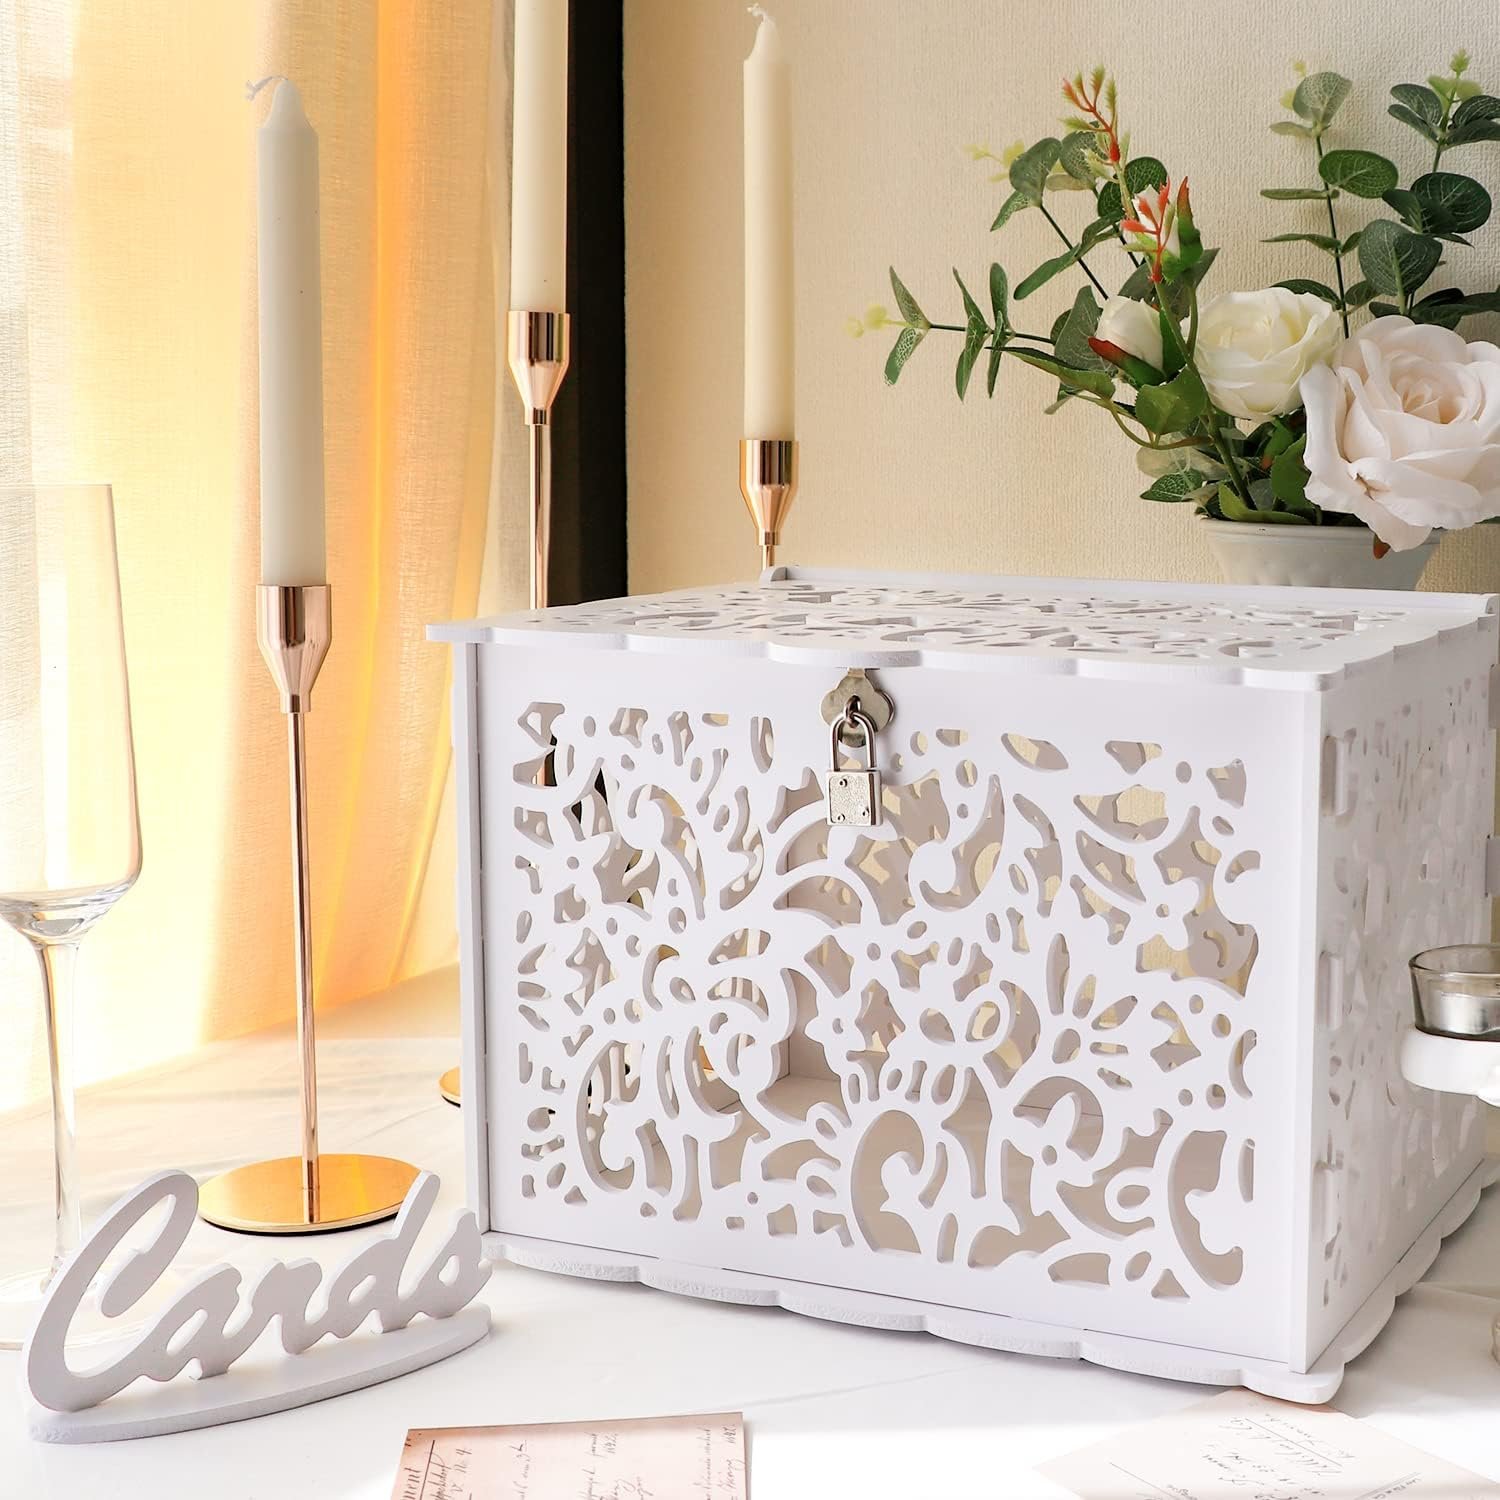 PVC Gift Card Box for Wedding Decorations Review